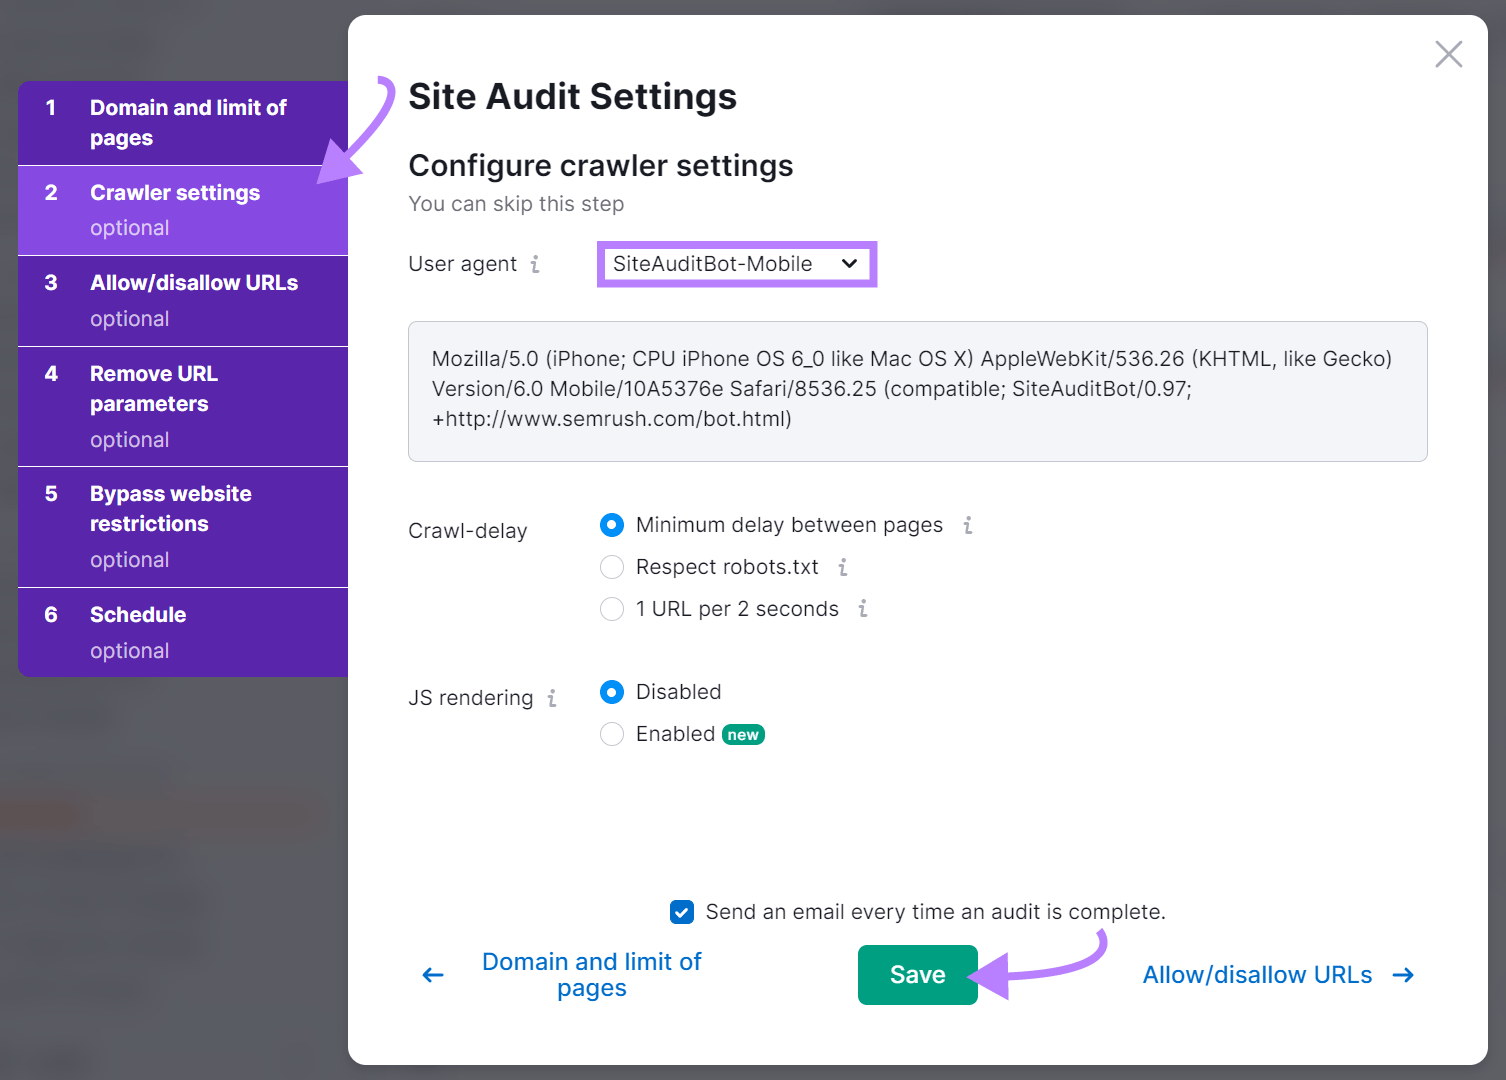 Site Audit settings page showing crawler set to "SiteAuditBot-Mobile"